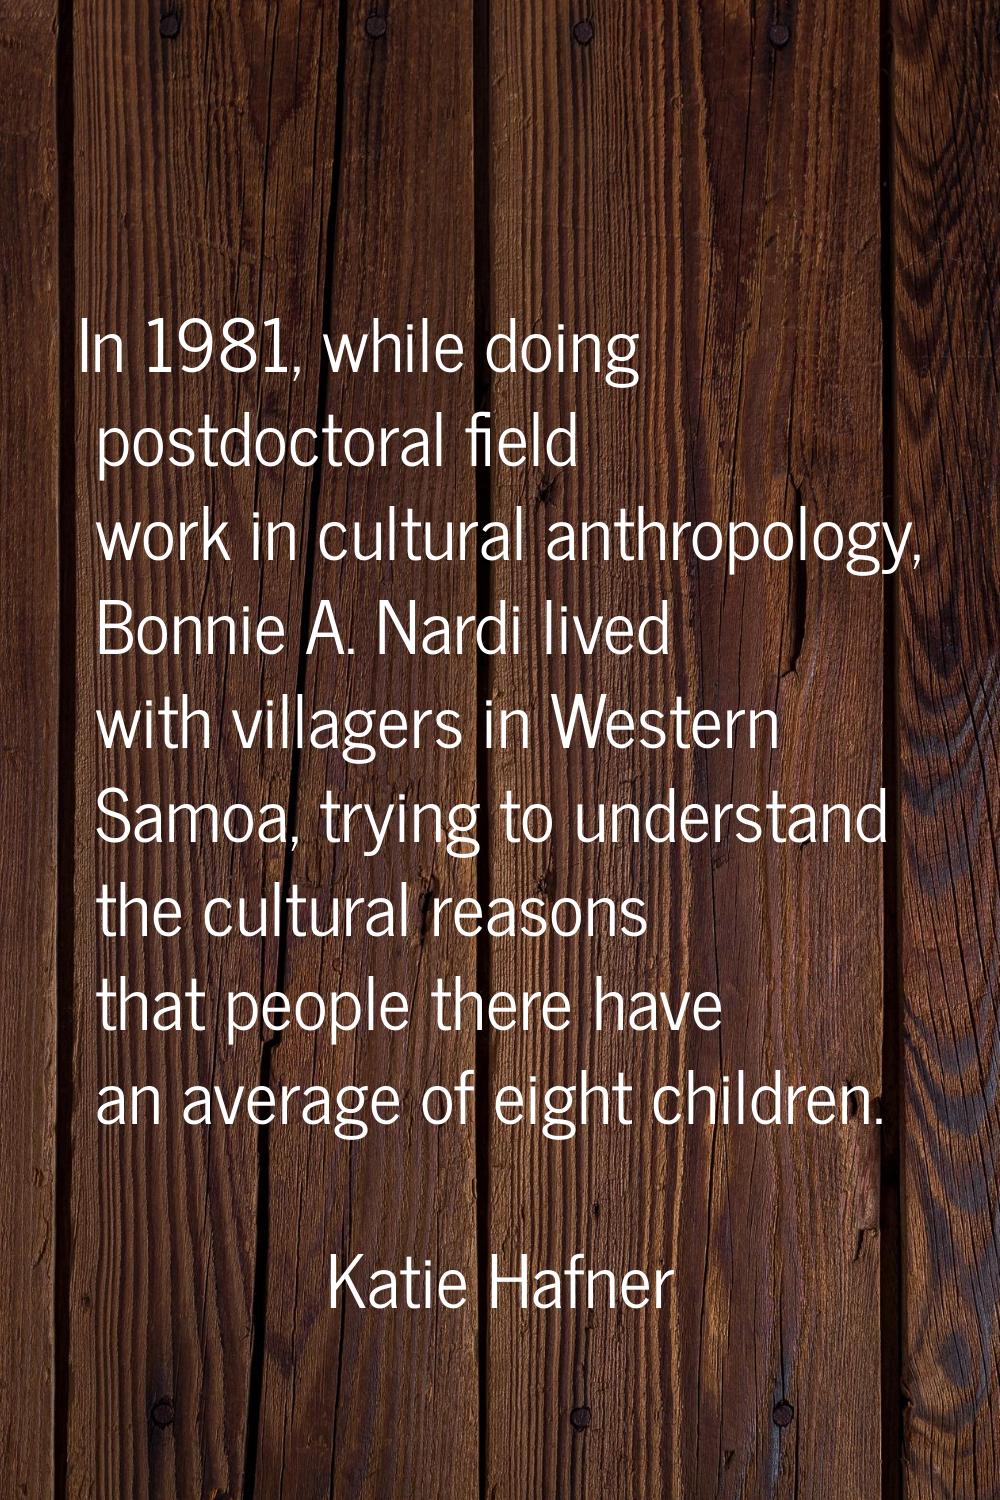 In 1981, while doing postdoctoral field work in cultural anthropology, Bonnie A. Nardi lived with v